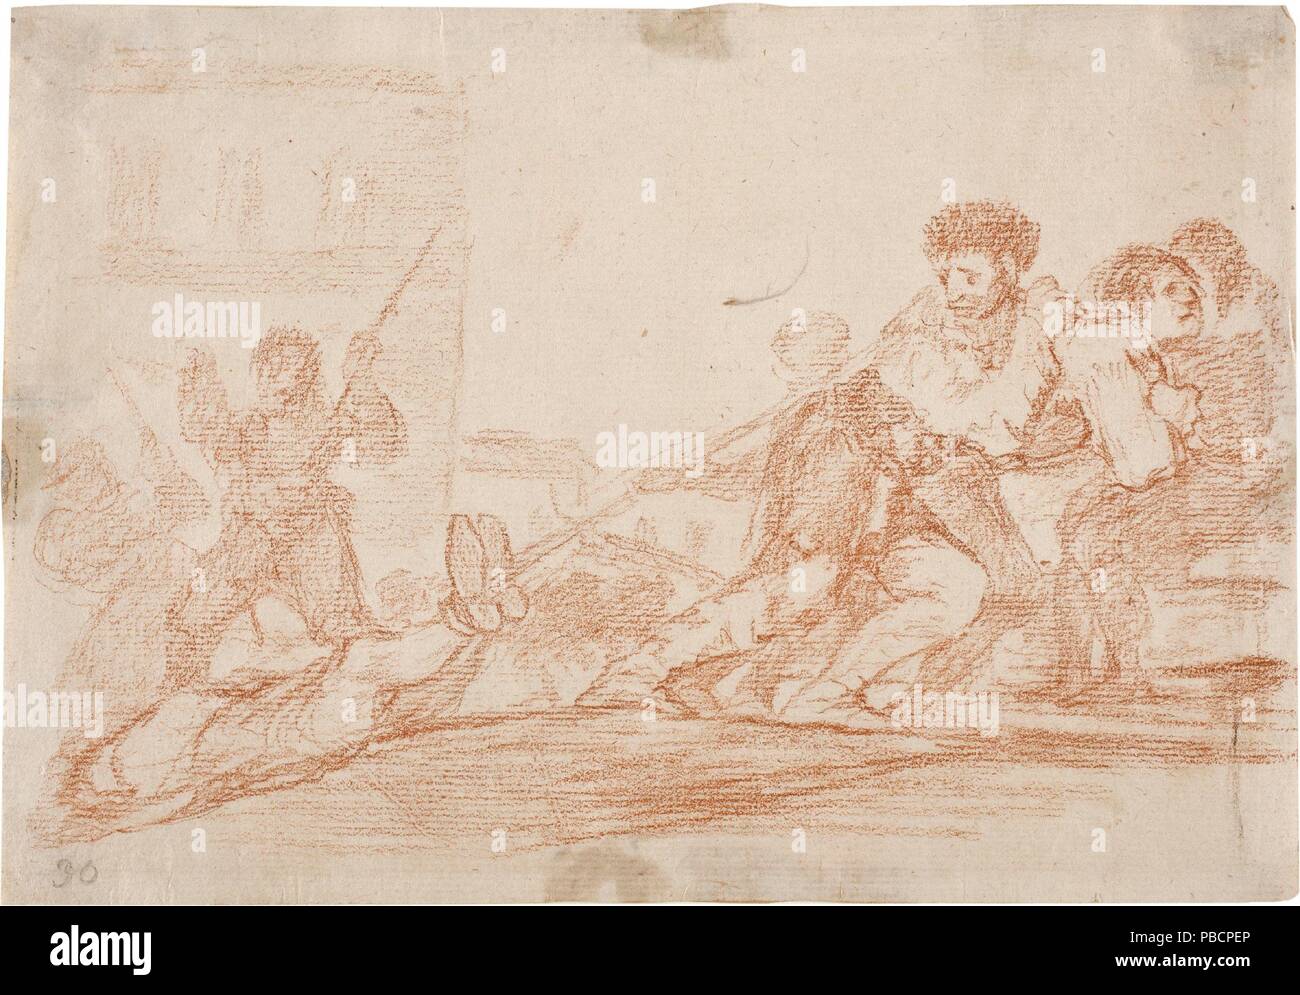 Francisco de Goya y Lucientes / 'He deserved it'. 1810 - 1814. Red chalk on ivory laid paper. Museum: Museo del Prado, Madrid, España. Stock Photo